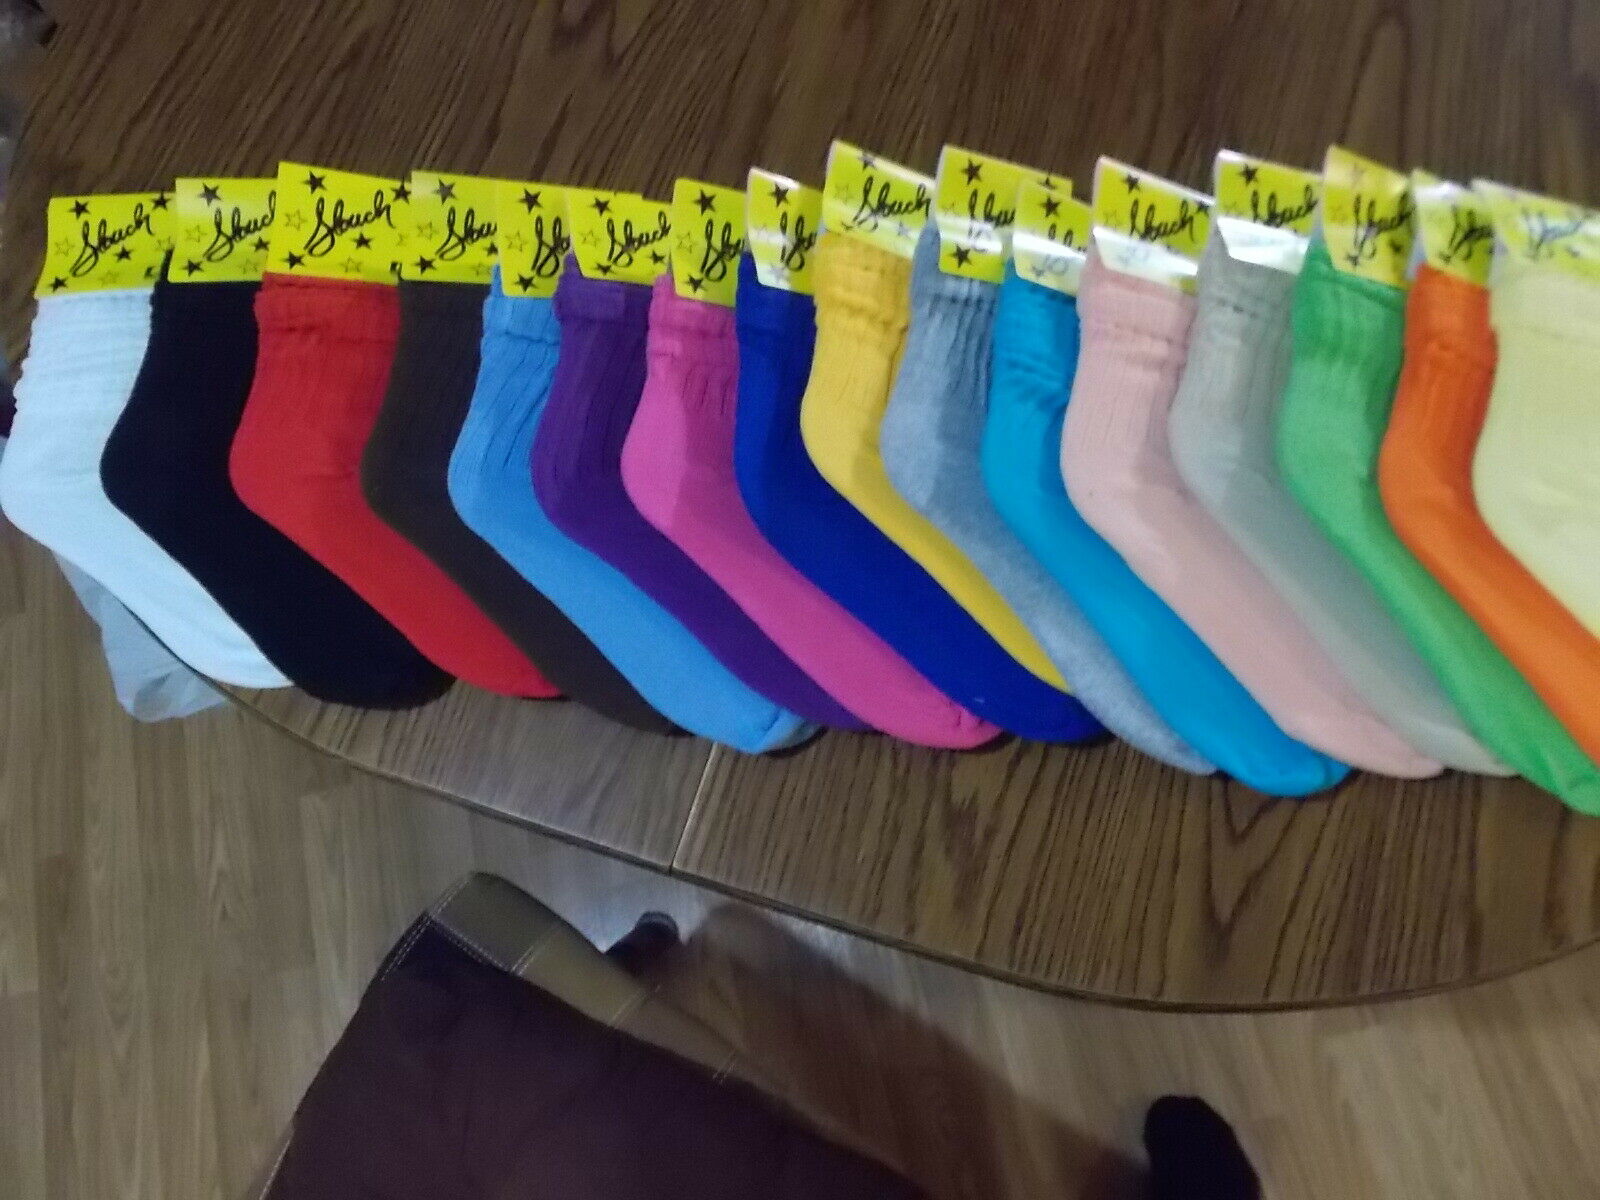 Women Slouch Socks Sz 9-11 Athletic U-choose From 19 Colors Nwts Free Shipping